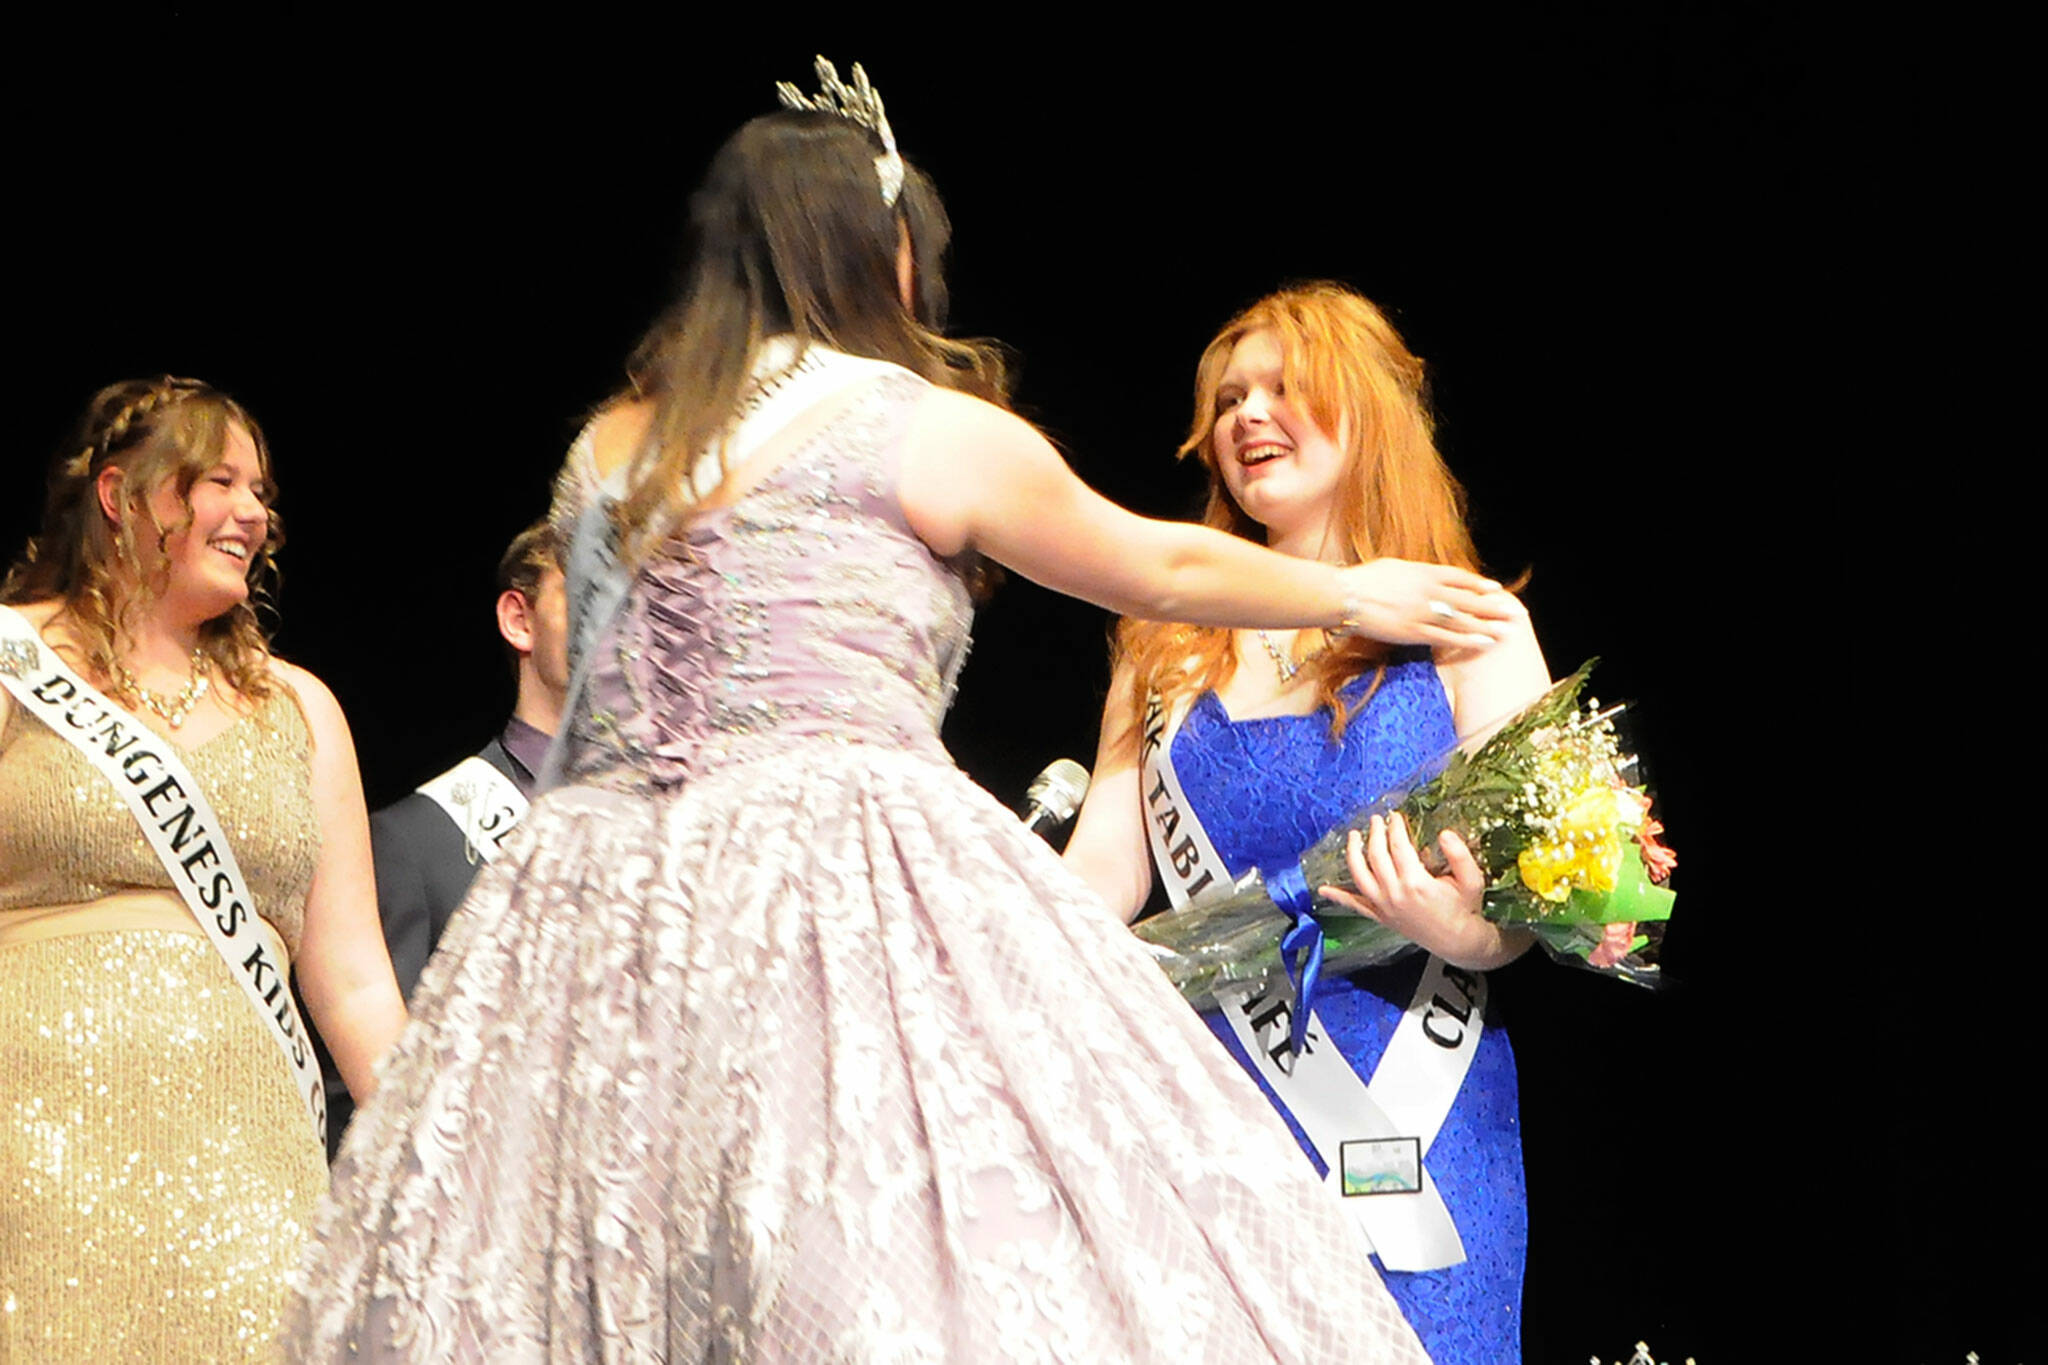 Sequim Gazette photo by Matthew Nash/ Princess Anne Marie Barni, right, learns she’s awarded the Congeniality Award on Feb. 25, sponsored by Castell Insurance, for her kindness to fellow contestants during the pageant preparation process. Last year’s winner, queen Isabella Williams, presented her the award. This year’s Sequim Irrigation Festival royal court includes, from left, prince Fred Cameron, princess Anne Marie Barni, queen Pepper Reymond, and princess Paige “Skylar” Krzyworz. They’ll tour the region extensively this summer in parades representing Sequim as ambassadors.